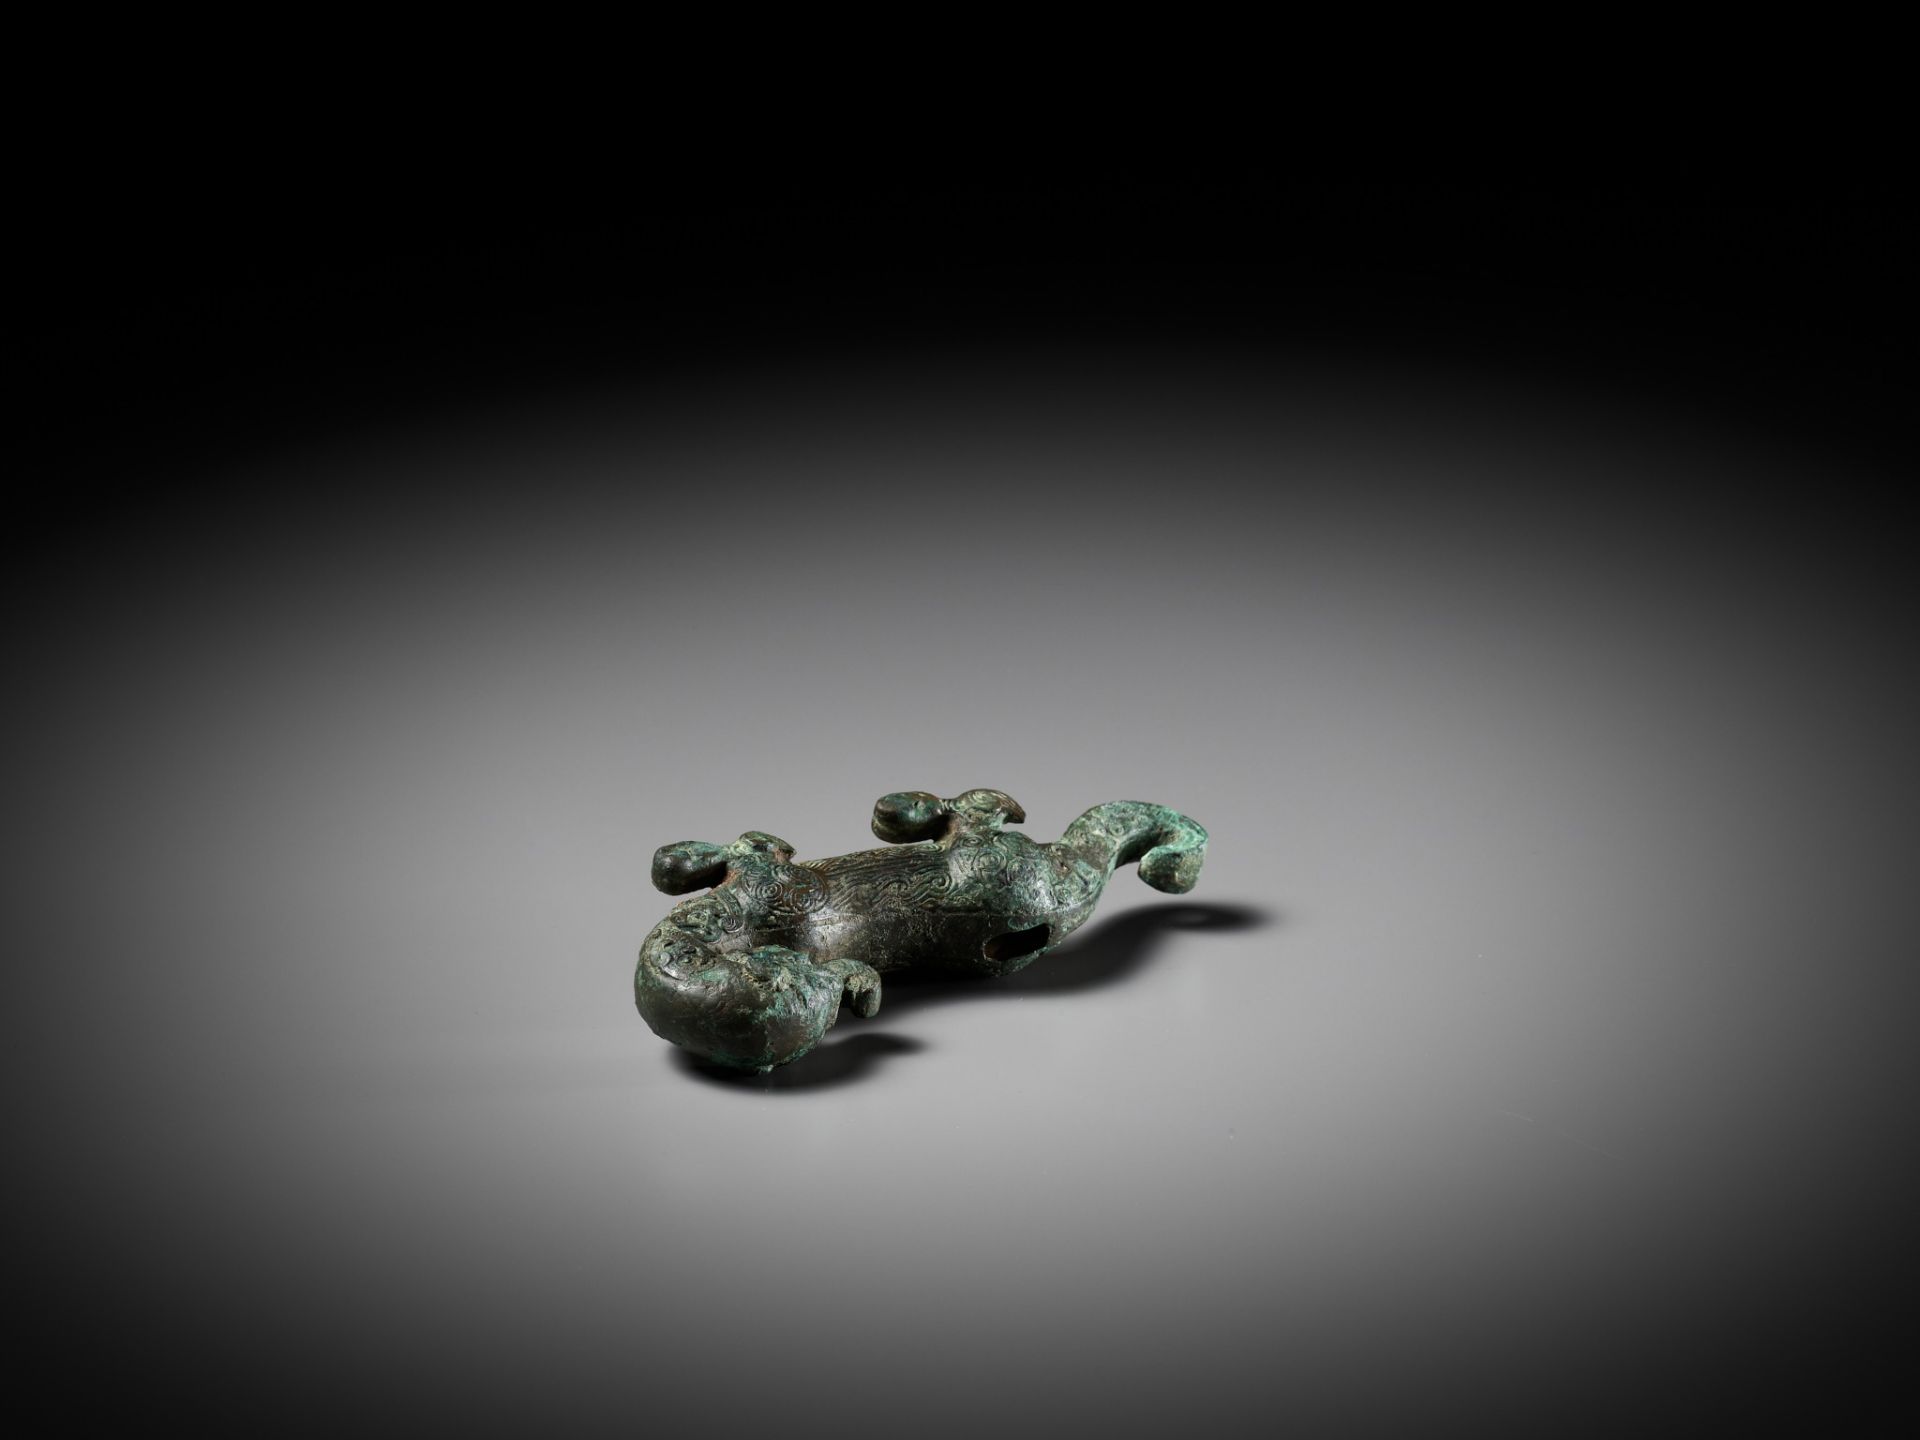 A SUPERB BRONZE FIGURE OF A DRAGON, EASTERN ZHOU DYNASTY, CHINA, 770-256 BC - Image 10 of 23